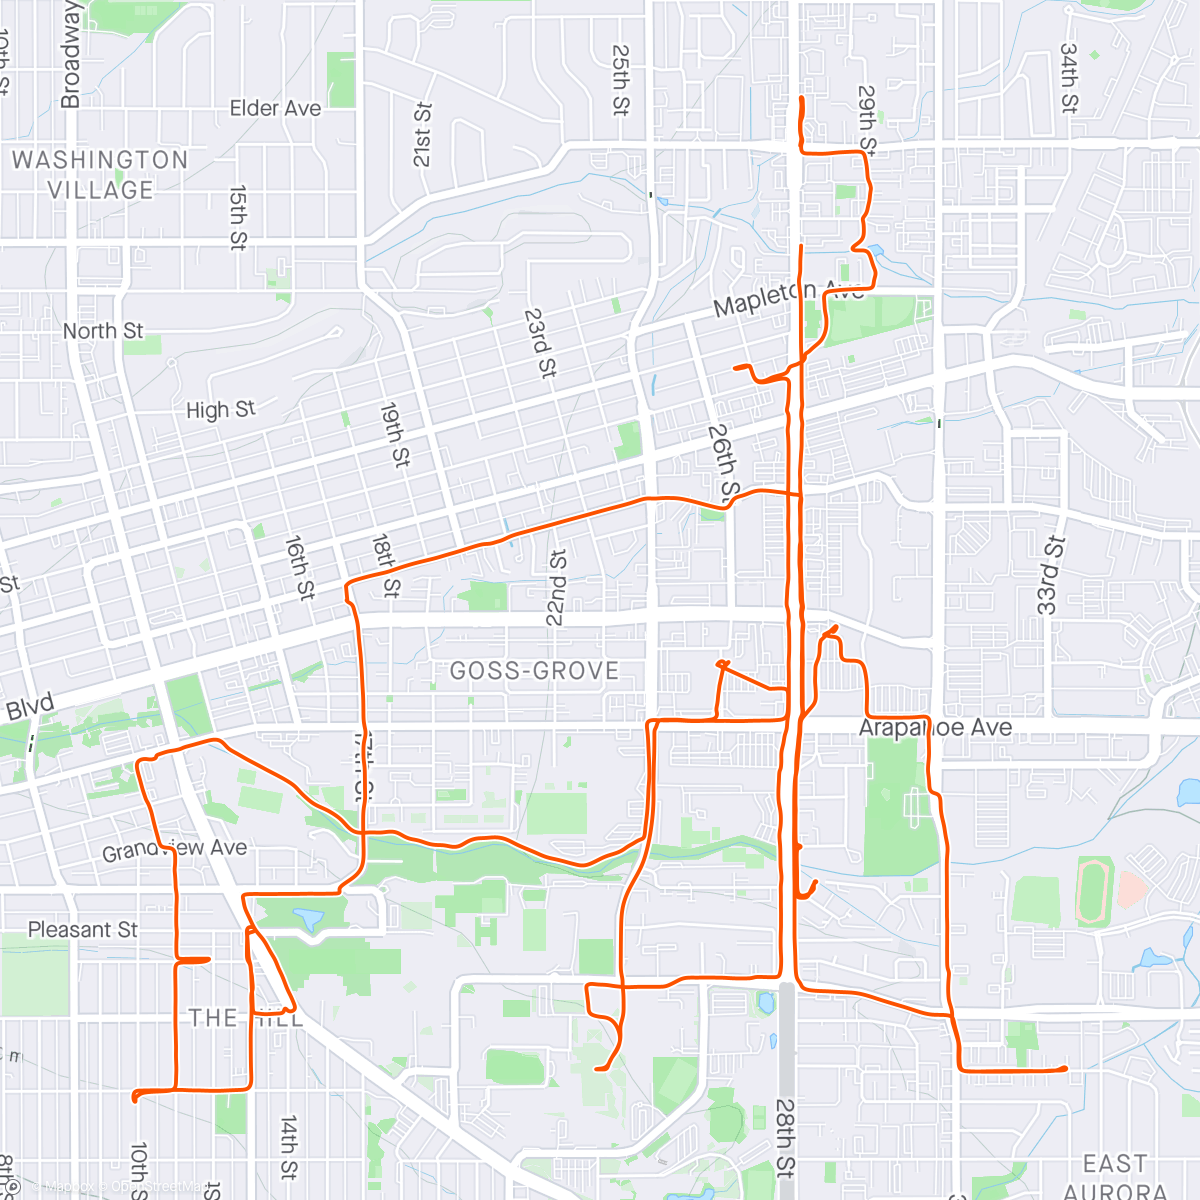 Map of the activity, Evening dash, which was surprisingly tame around town given that it’s St. Paddy’s Day. Guess the kids don’t party like they used to 😆🍀